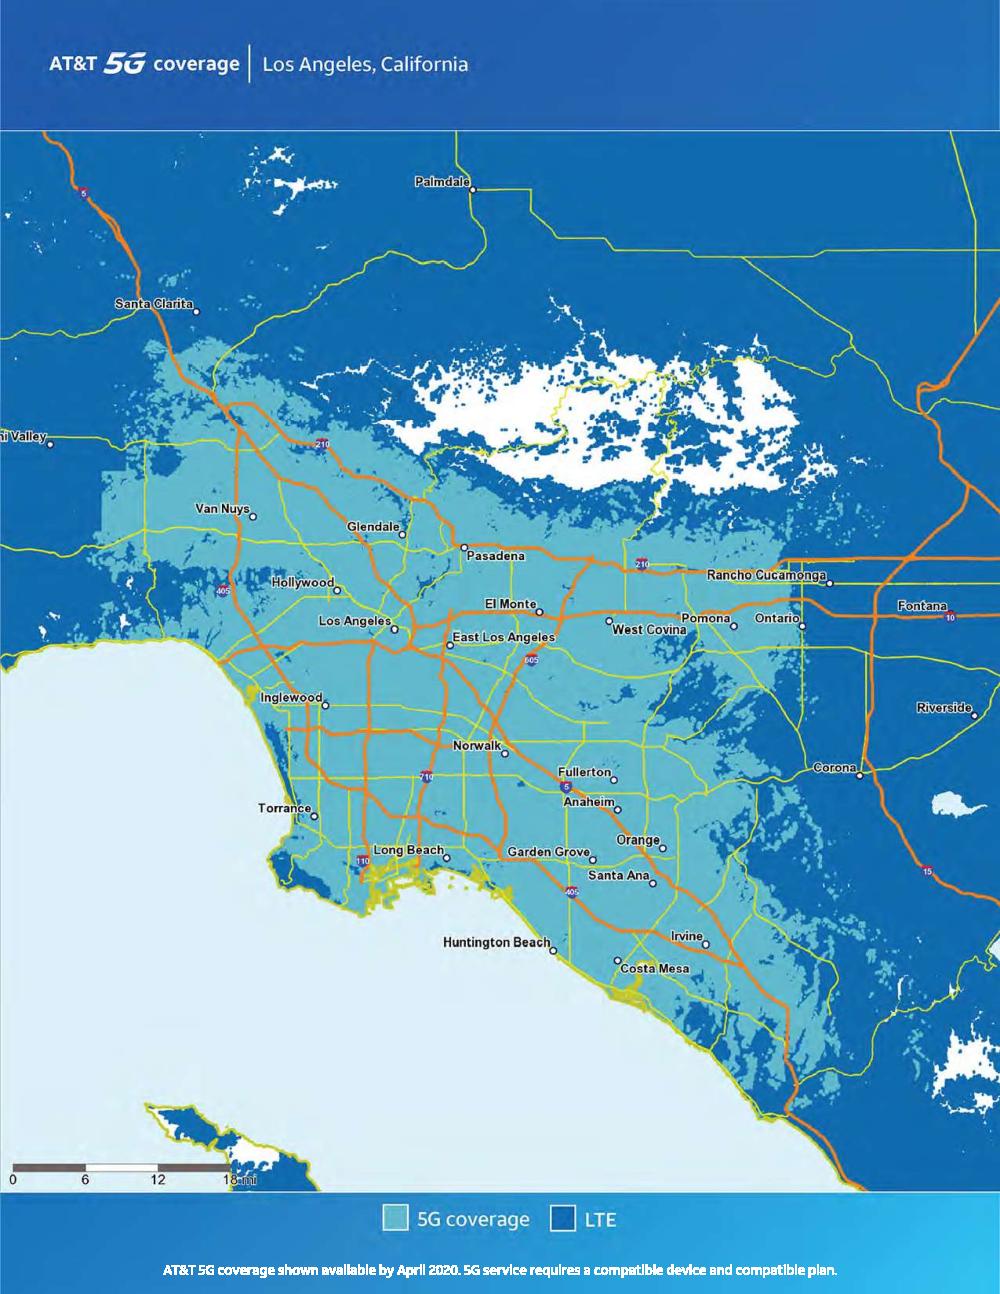 AT&T Los Angeles 5G Coverage